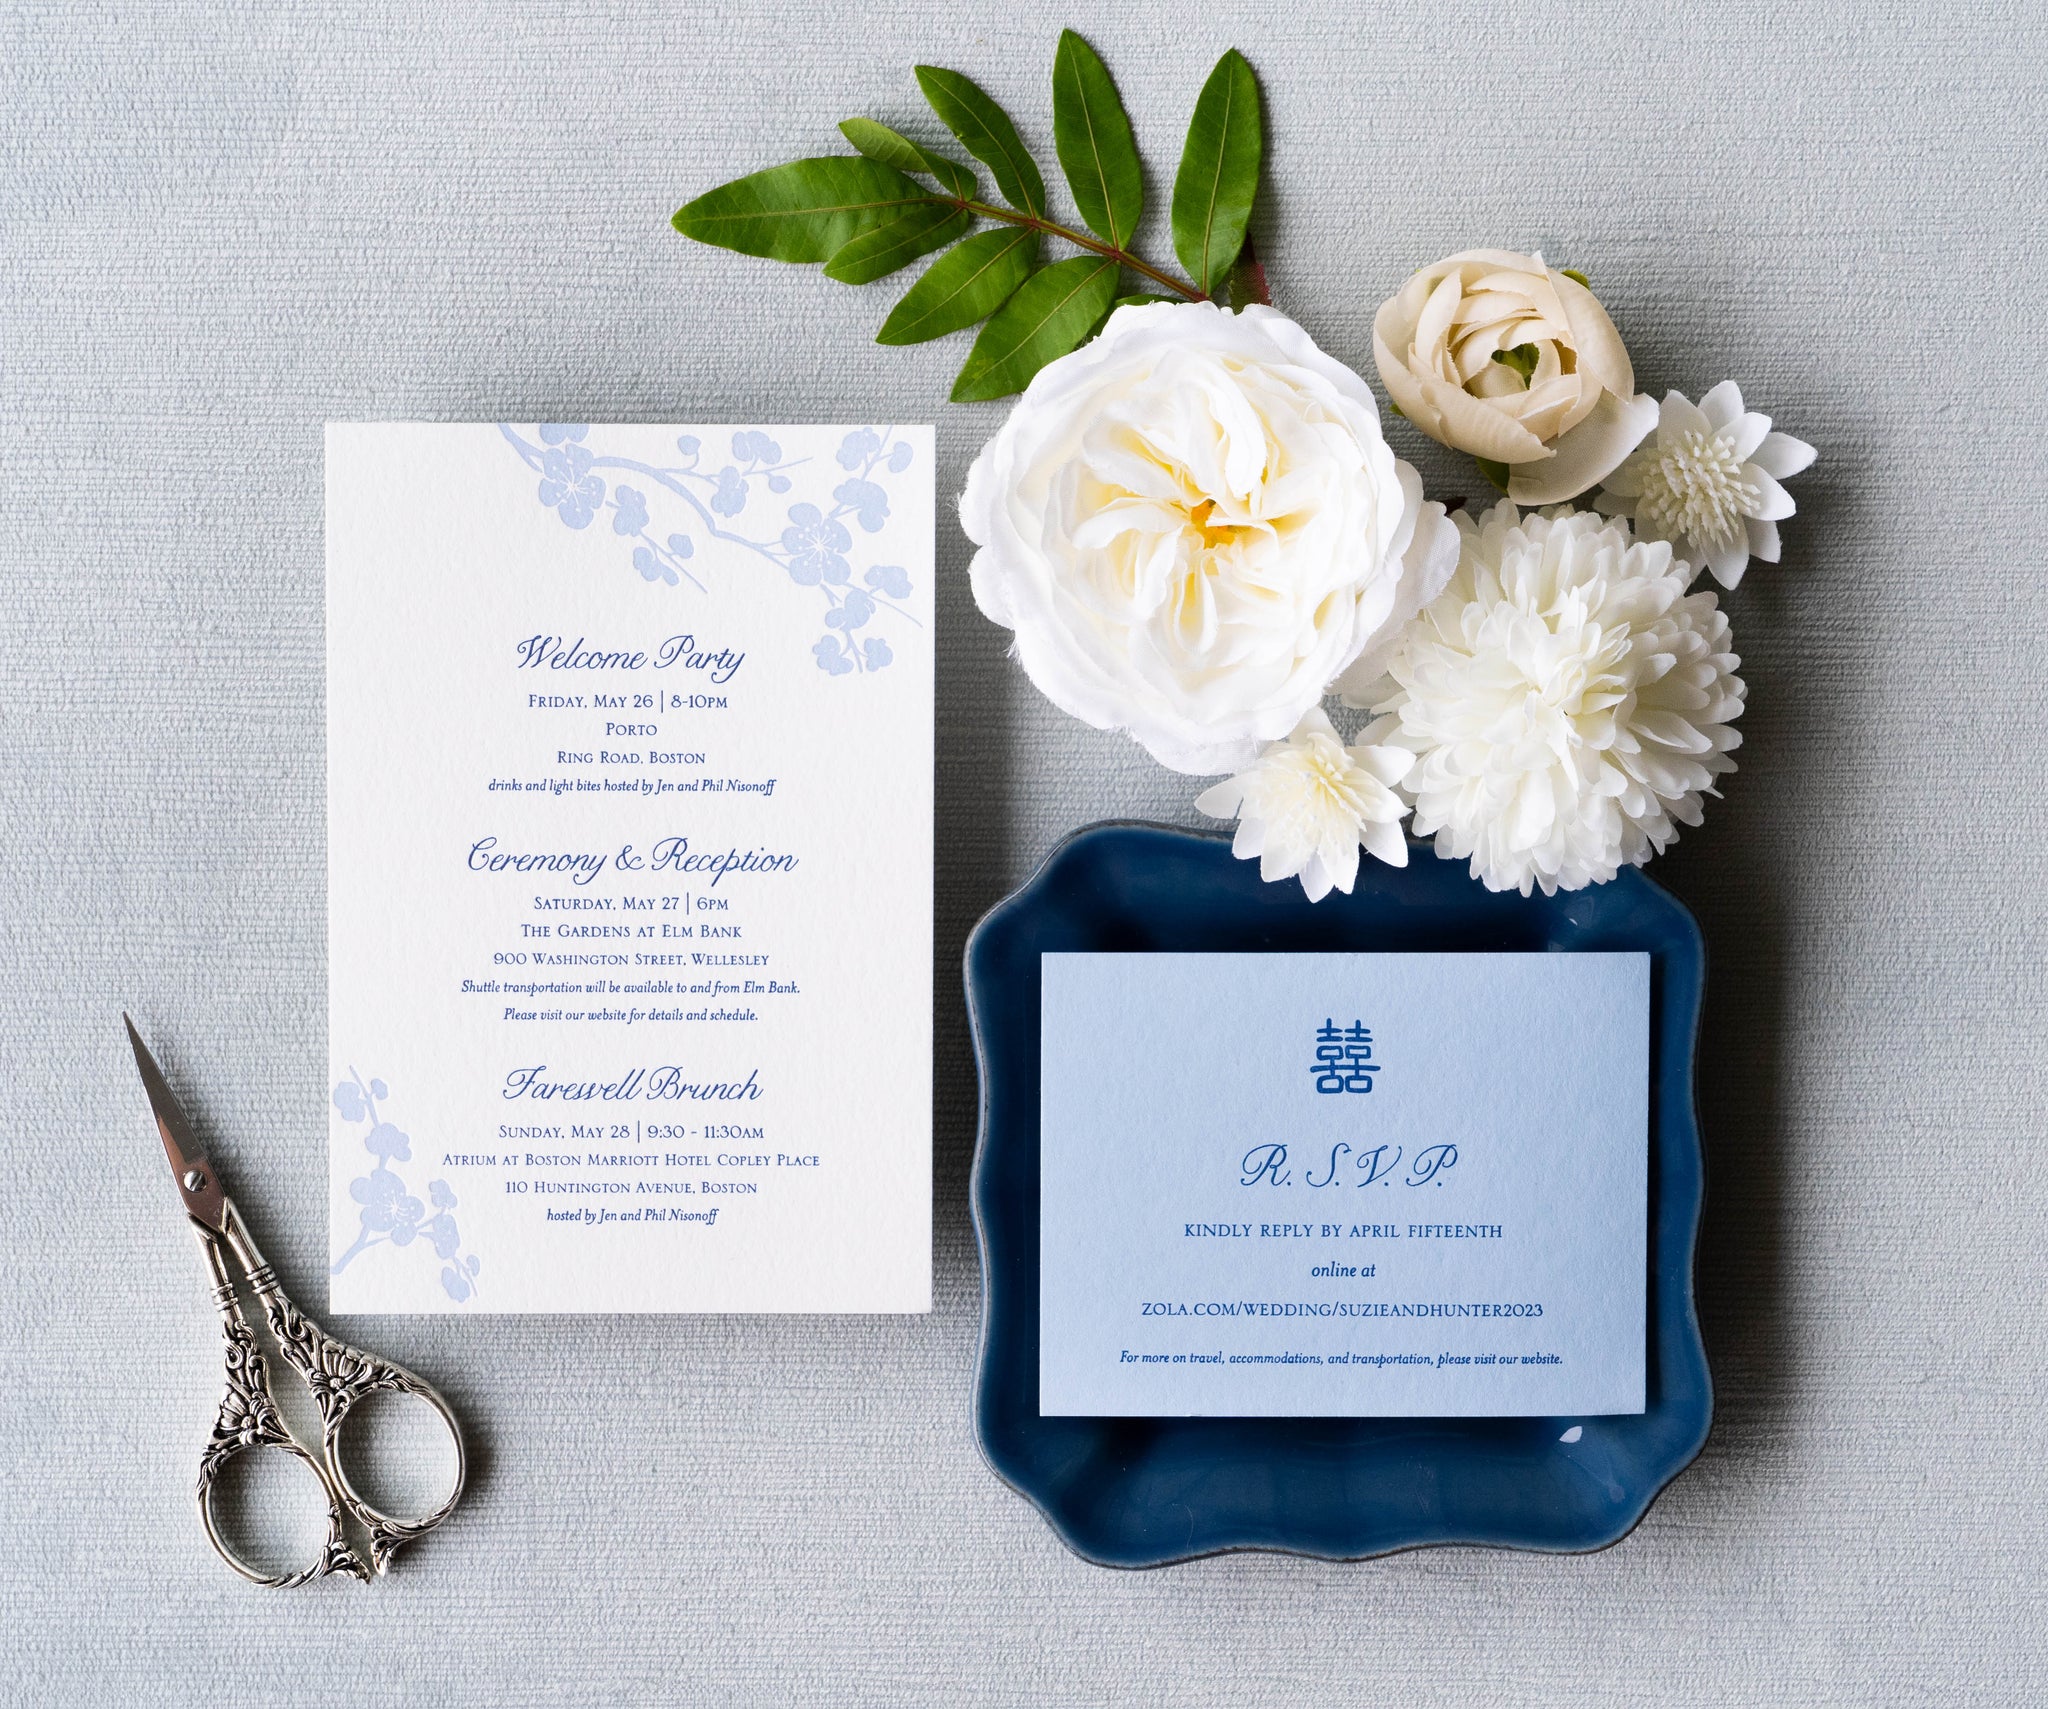 Plum blossom cherry blossom letterpress invitation suite with double happiness rsvp card in dark blue ink on colored stock